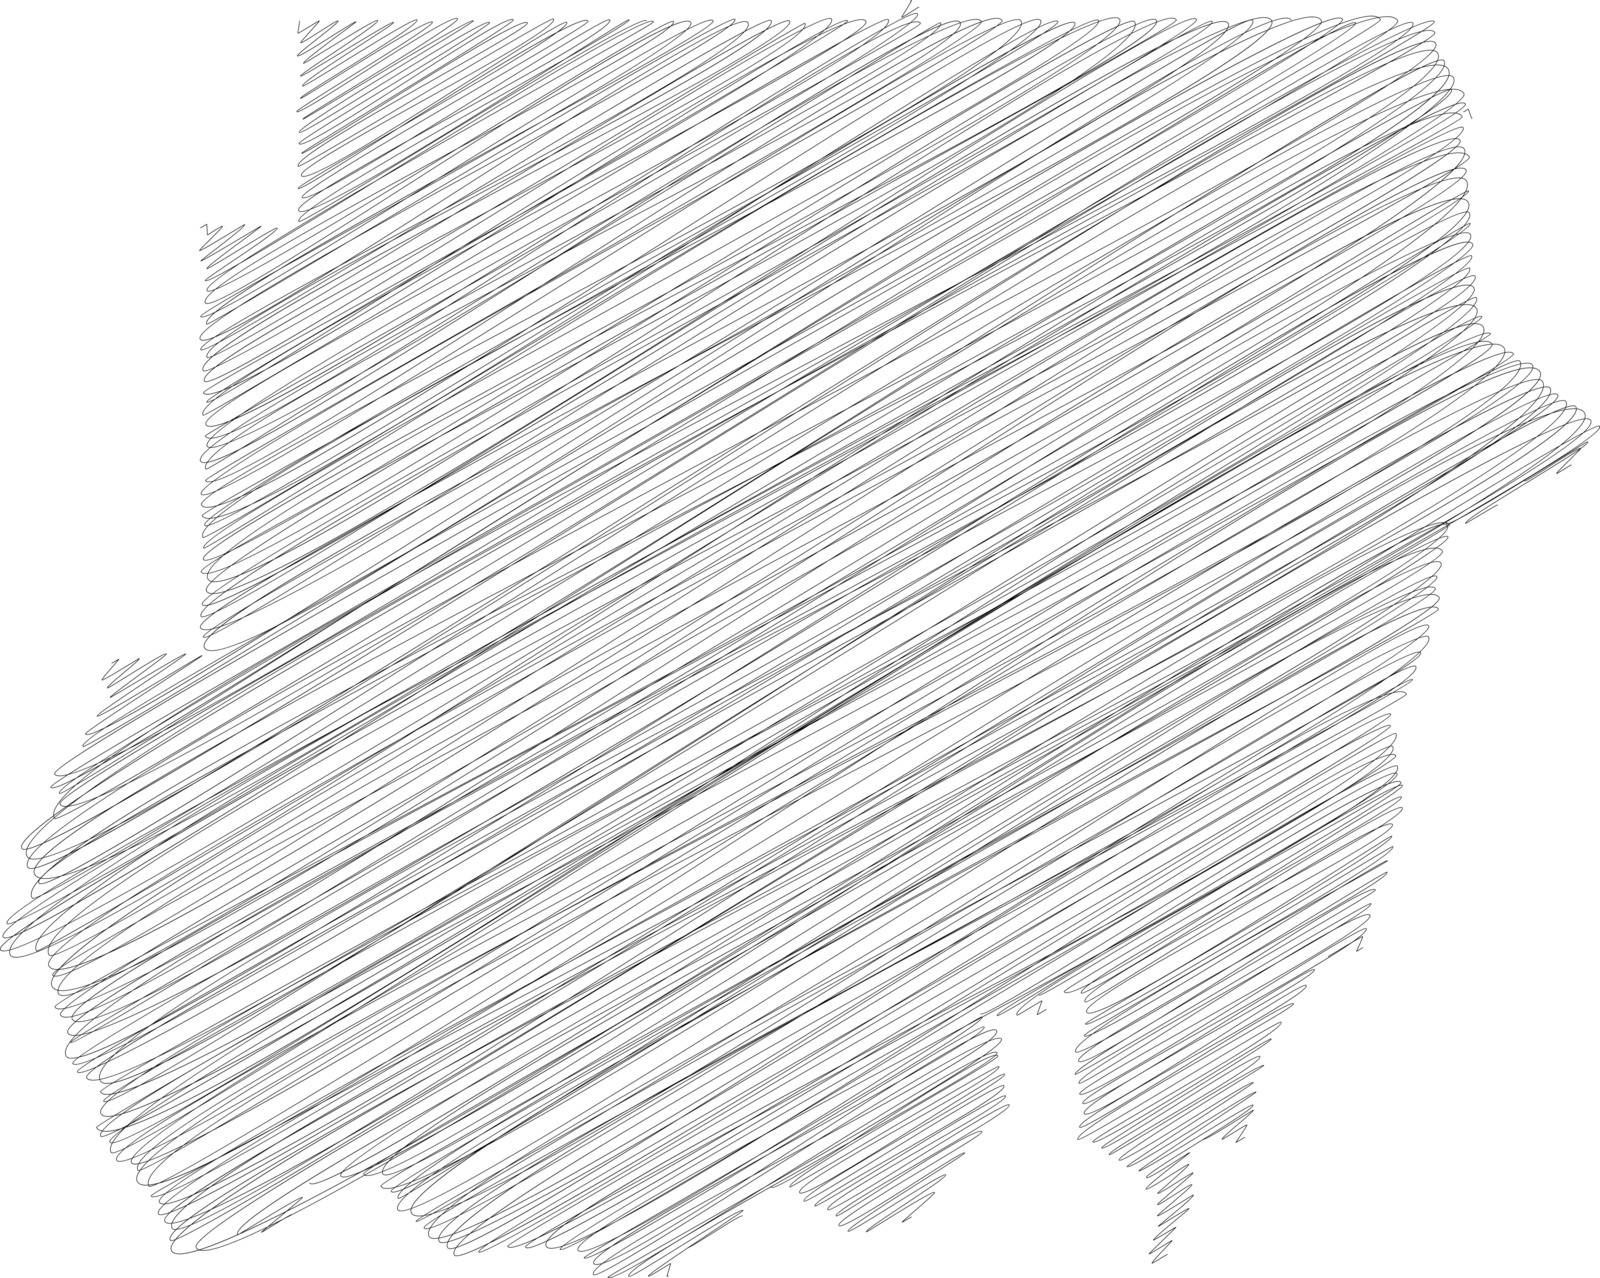 Sudan - pencil scribble sketch silhouette map of country area with dropped shadow. Simple flat vector illustration.